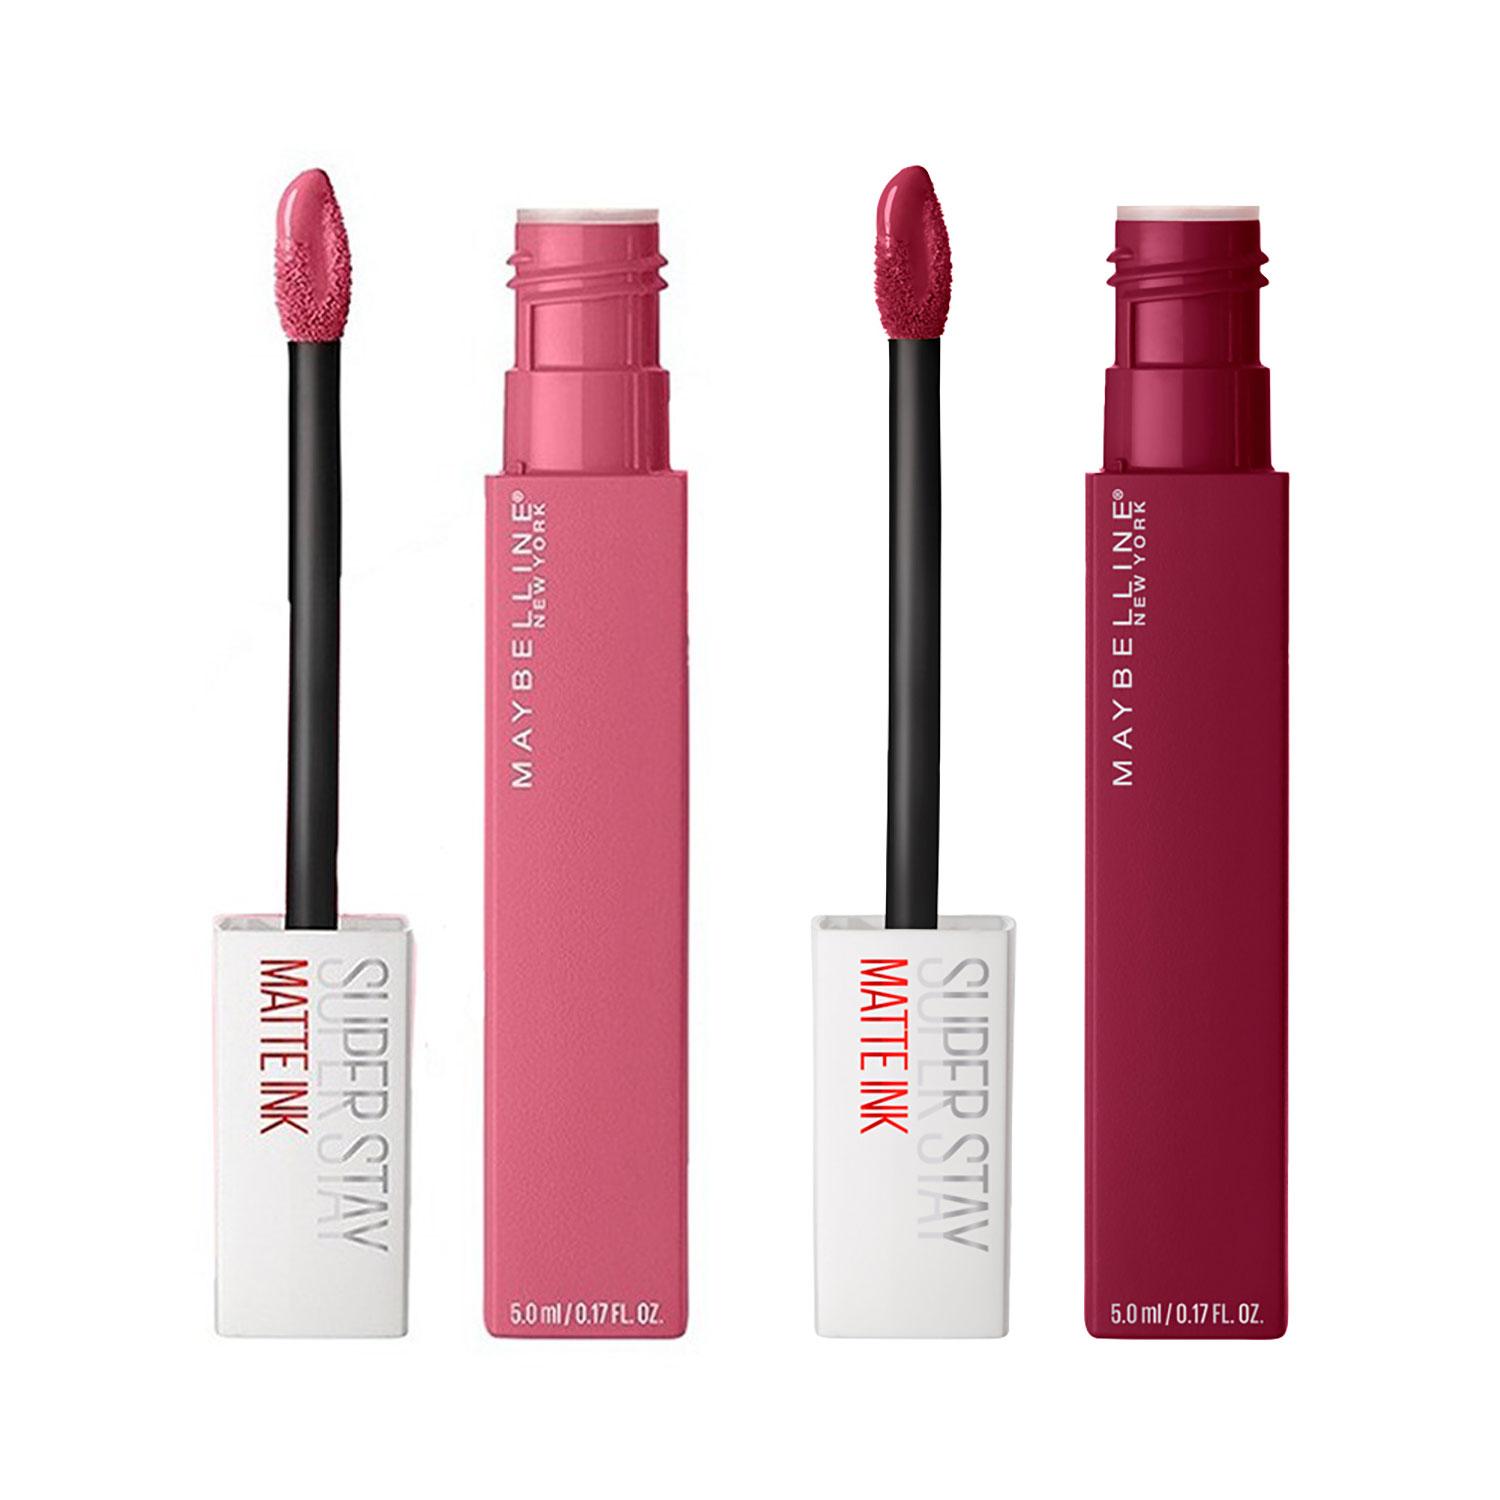 Maybelline New York Super Stay Matte Ink Liquid Lipstick Pack of 2 (Shades 115 & 125)